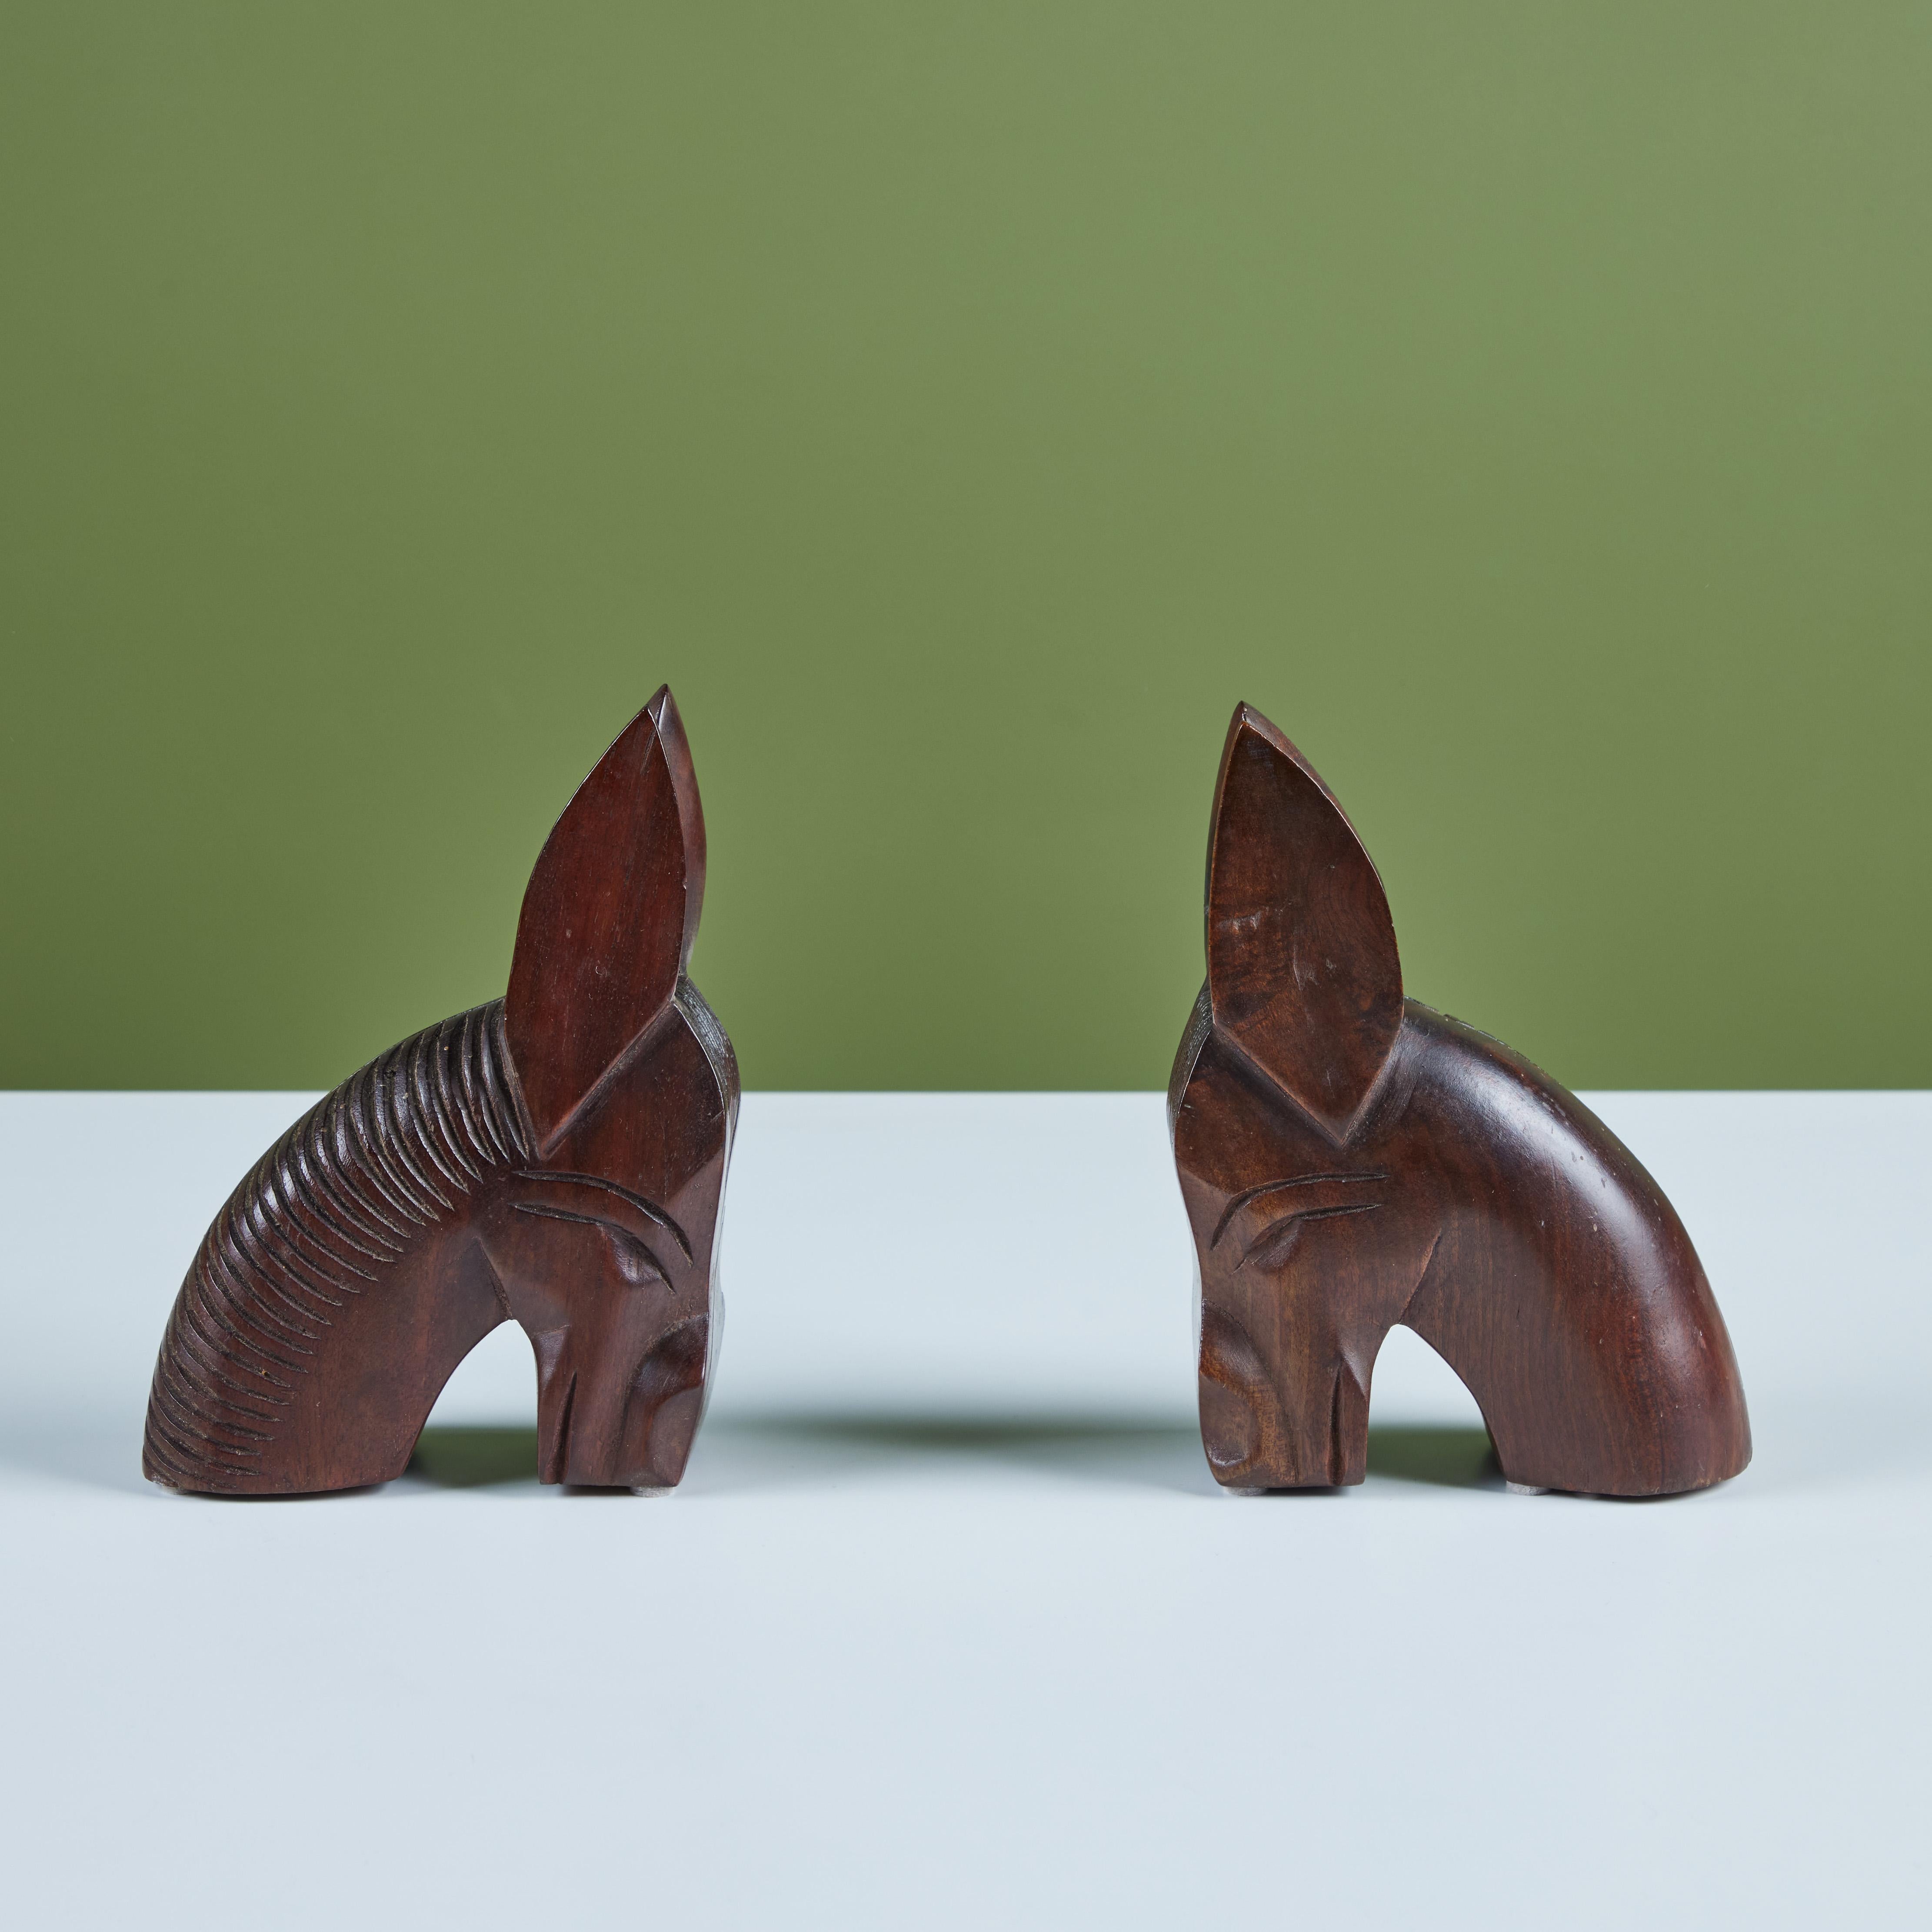 Haitian Pair of Wood Donkey Bookends For Sale